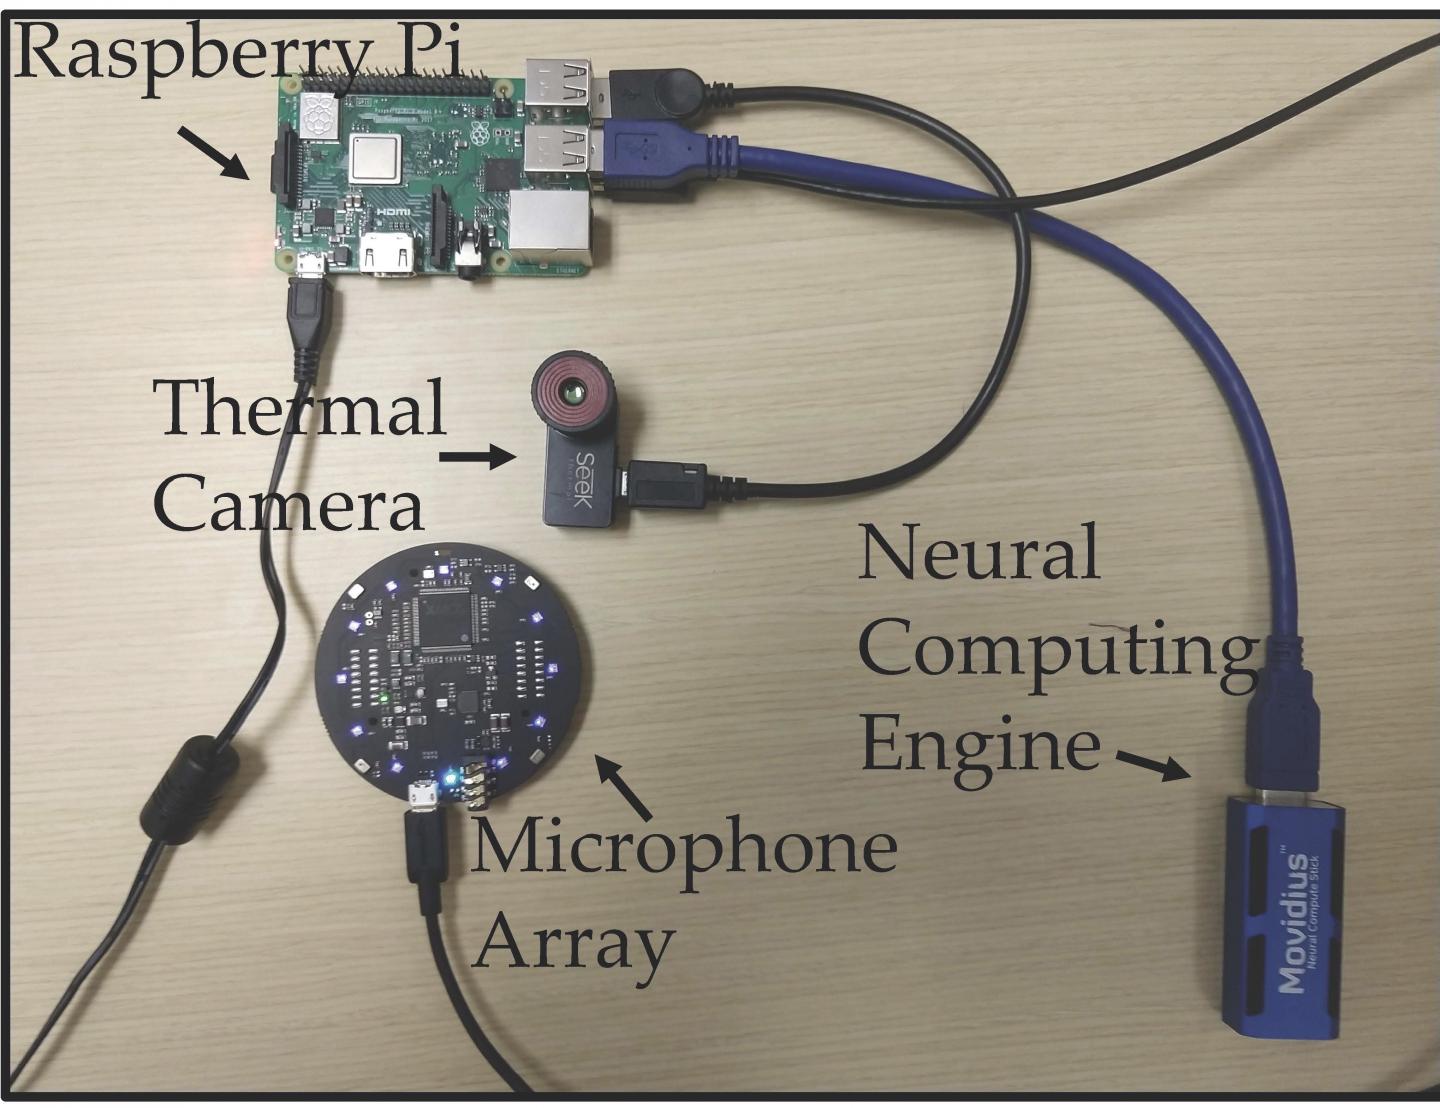 The FluSense device houses these components. Source: UMass Amherst